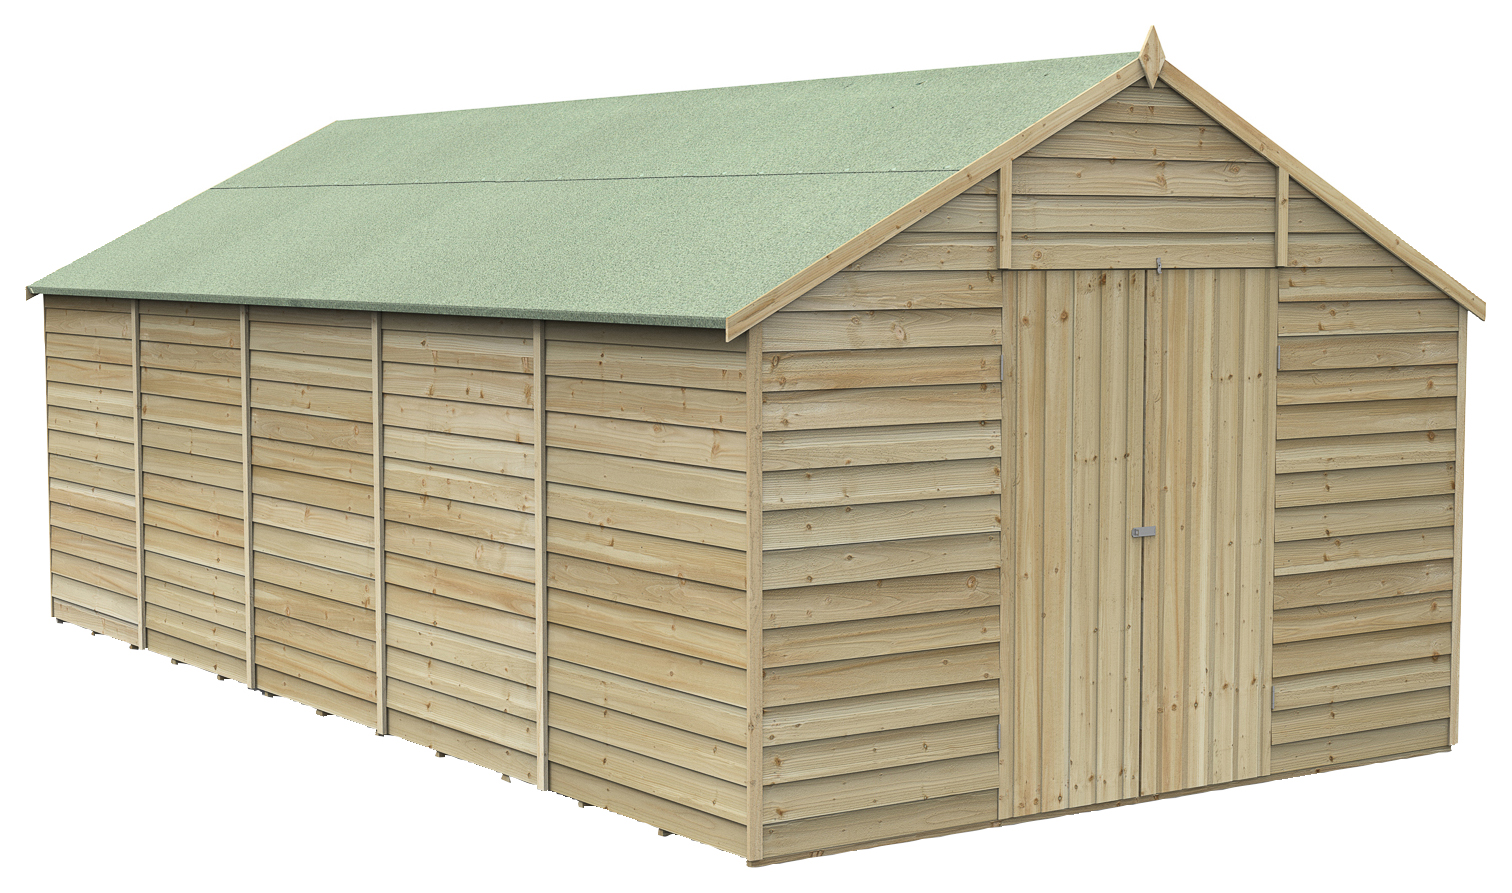 Forest Garden 10 x 20ft 4Life Apex Overlap Pressure Treated Double Door Windowless Shed with Assembly